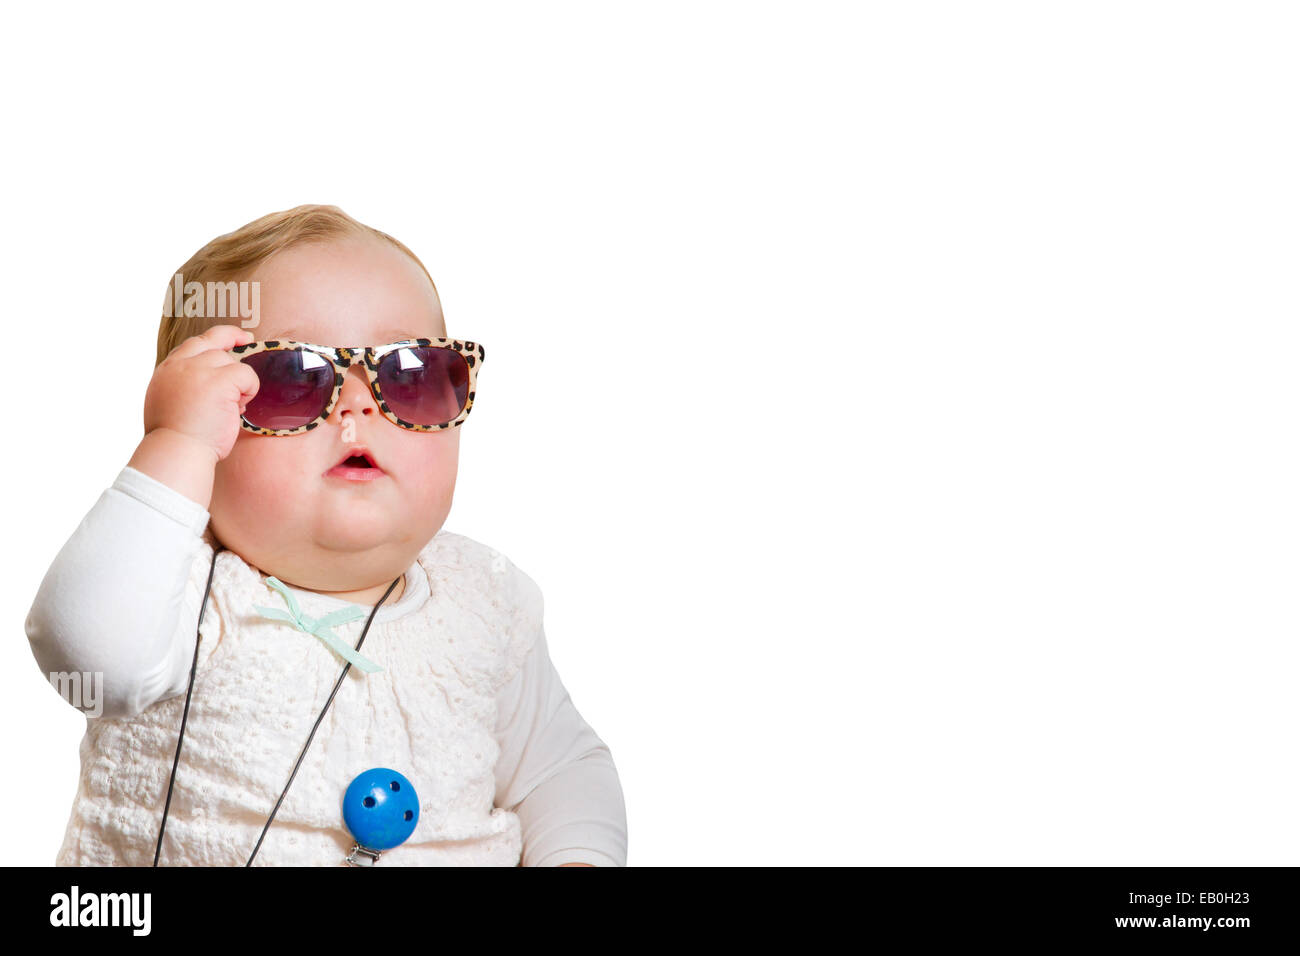 Baby with sunglasses Stock Photo